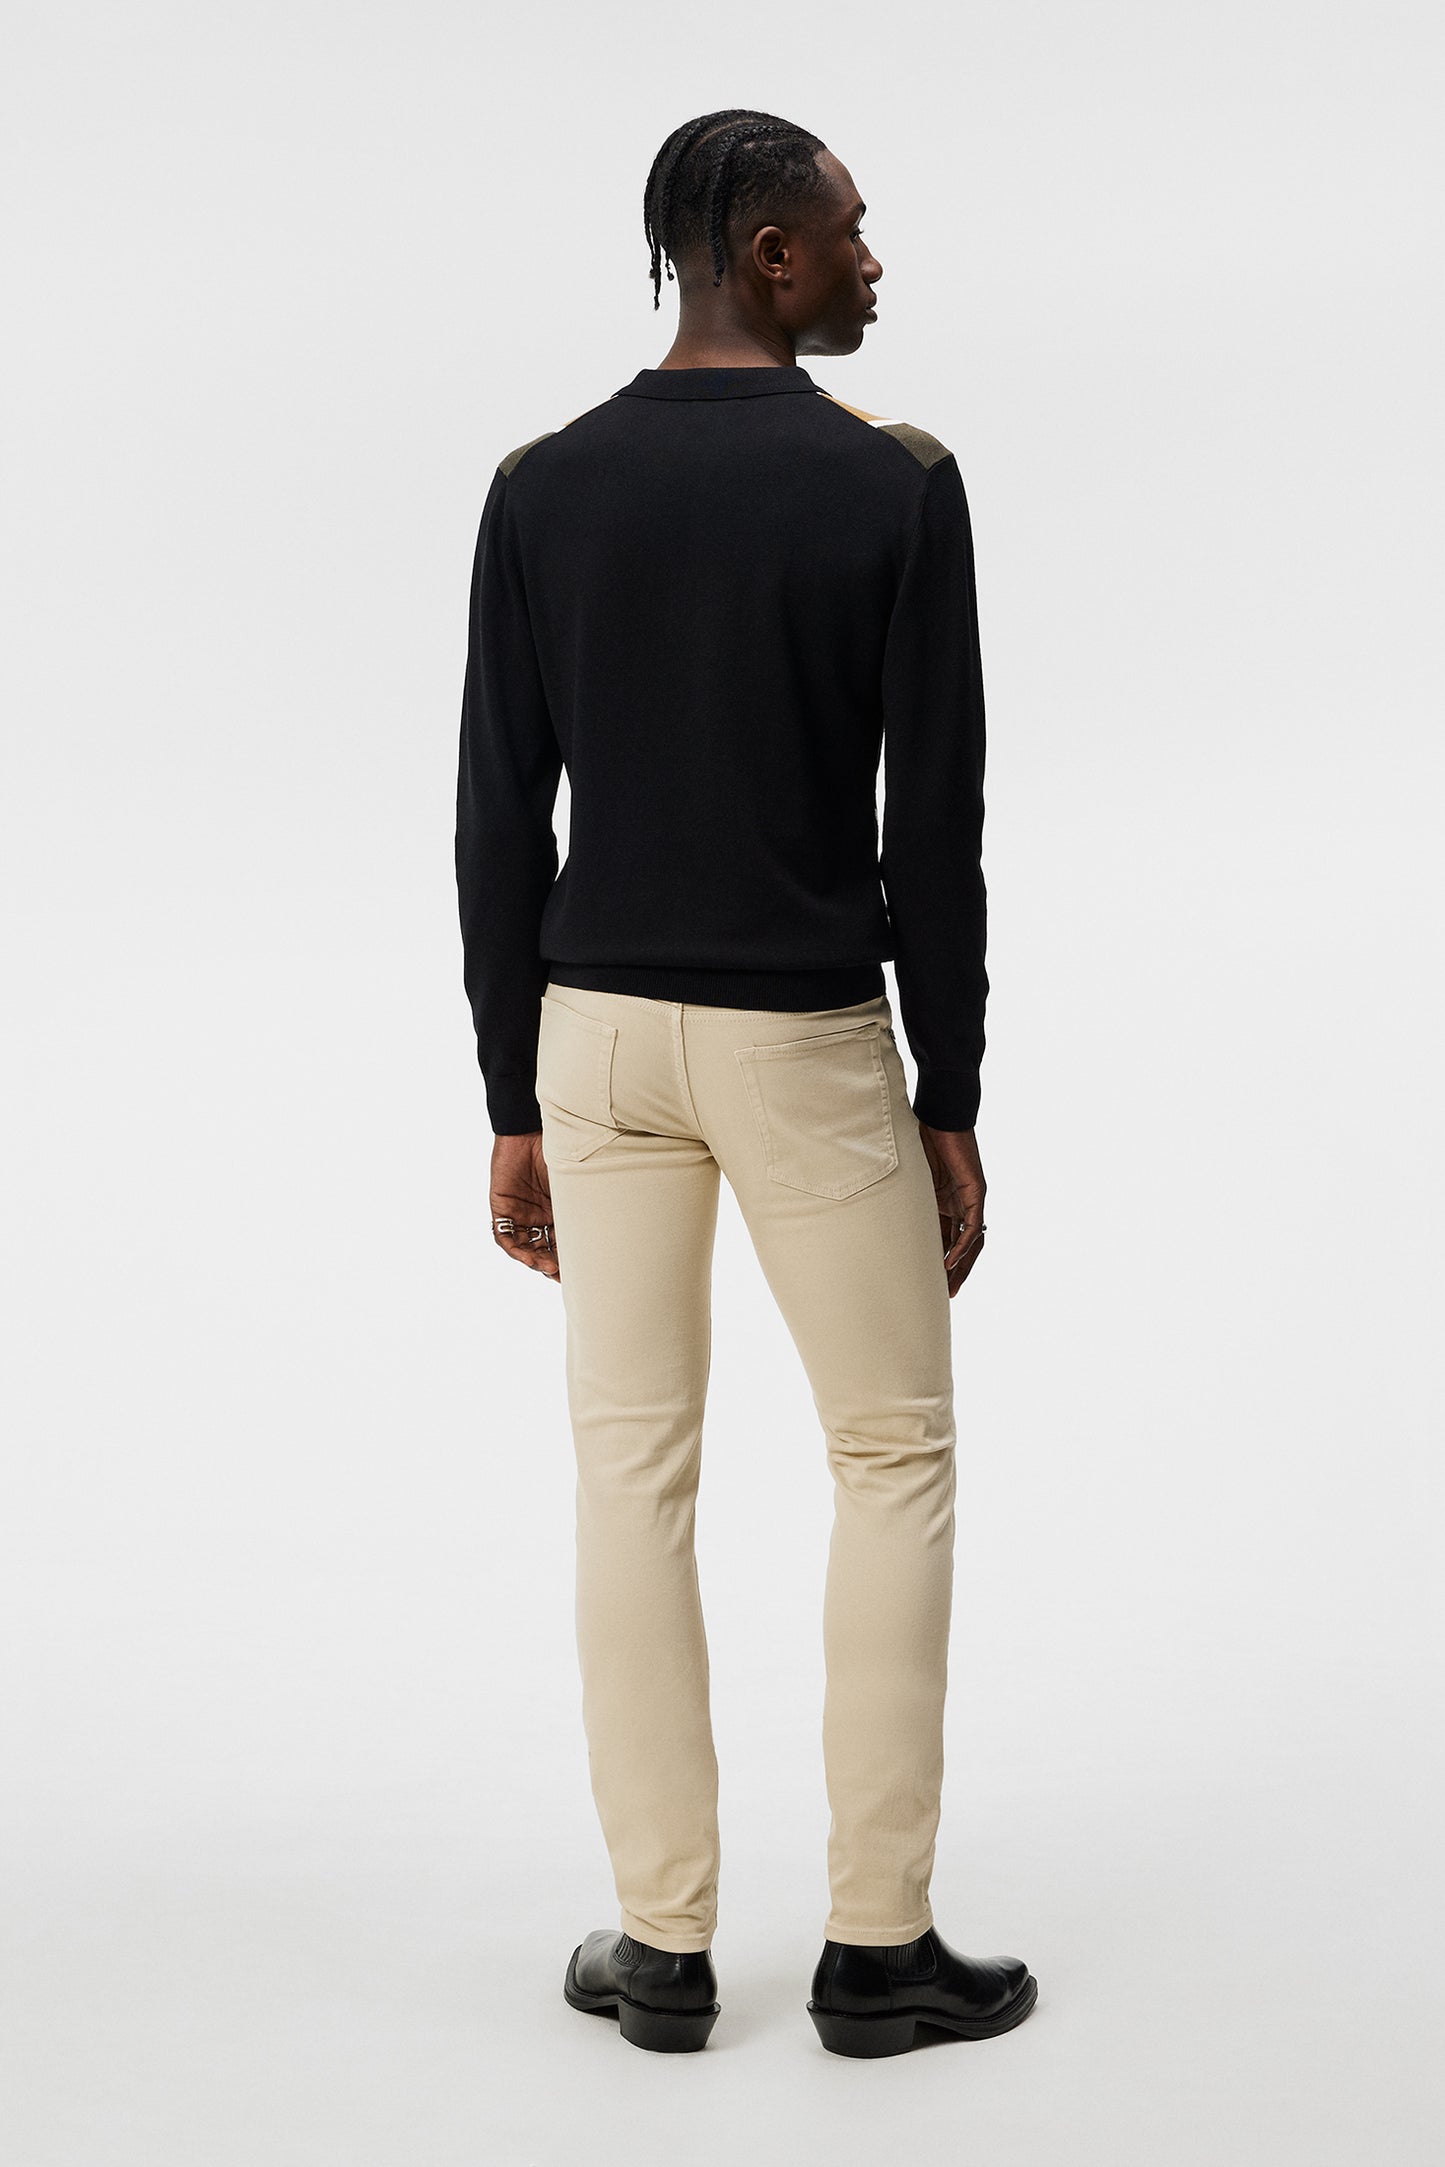 Jay Solid Stretch Jeans / Oyster Gray – J.Lindeberg